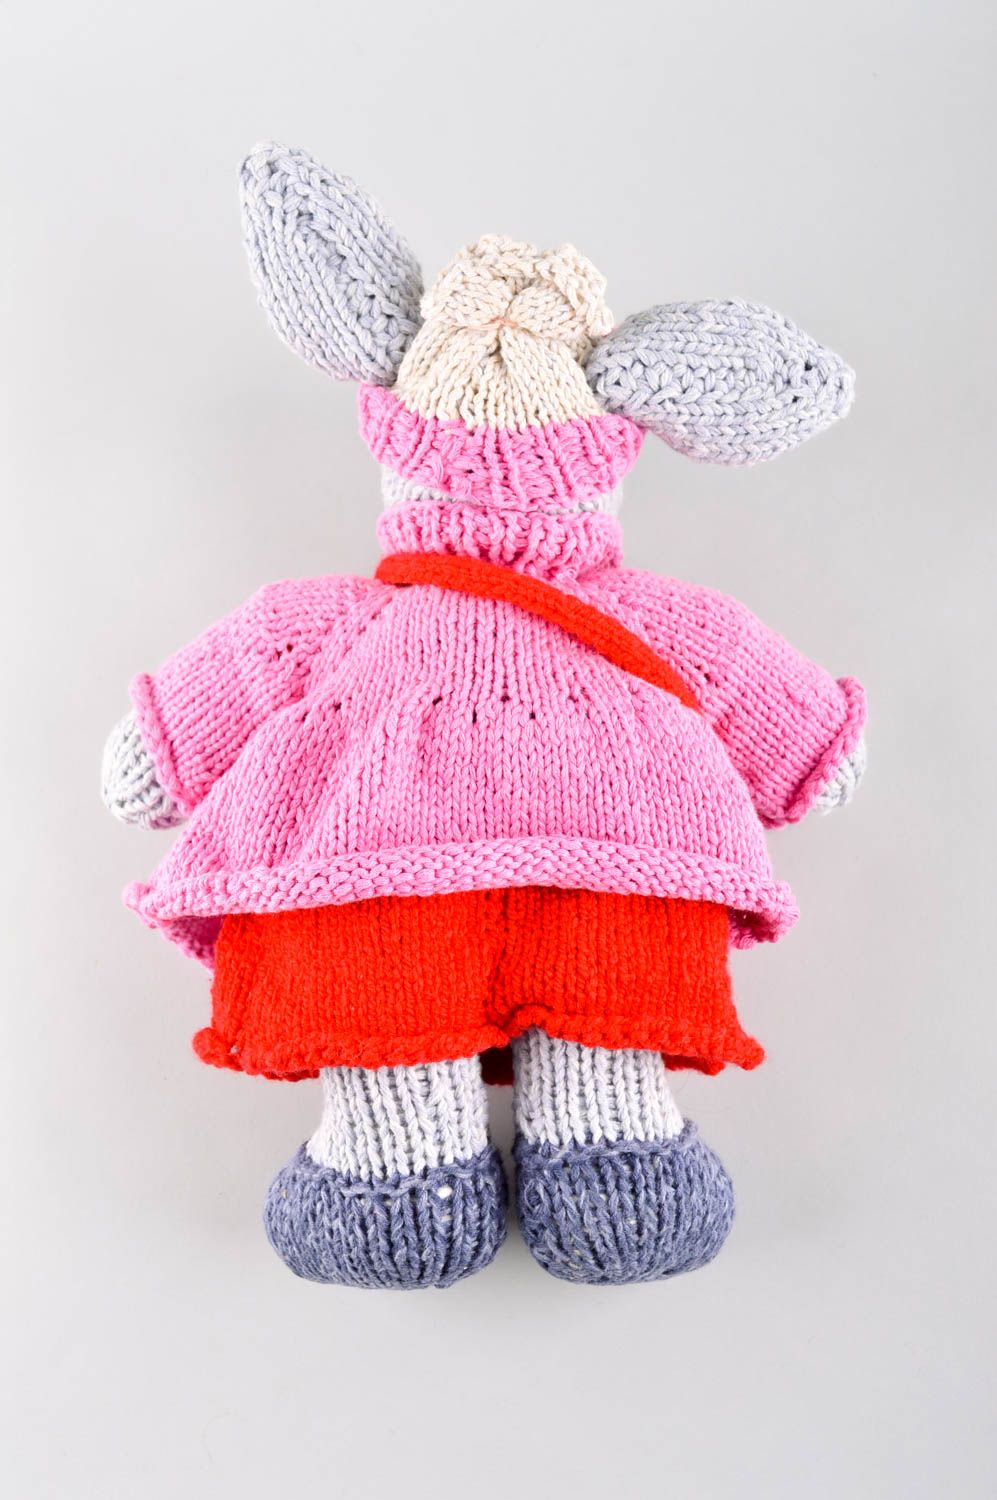 Handmade unusual soft toy textile toys for kids pink knitted rabbit toy photo 4